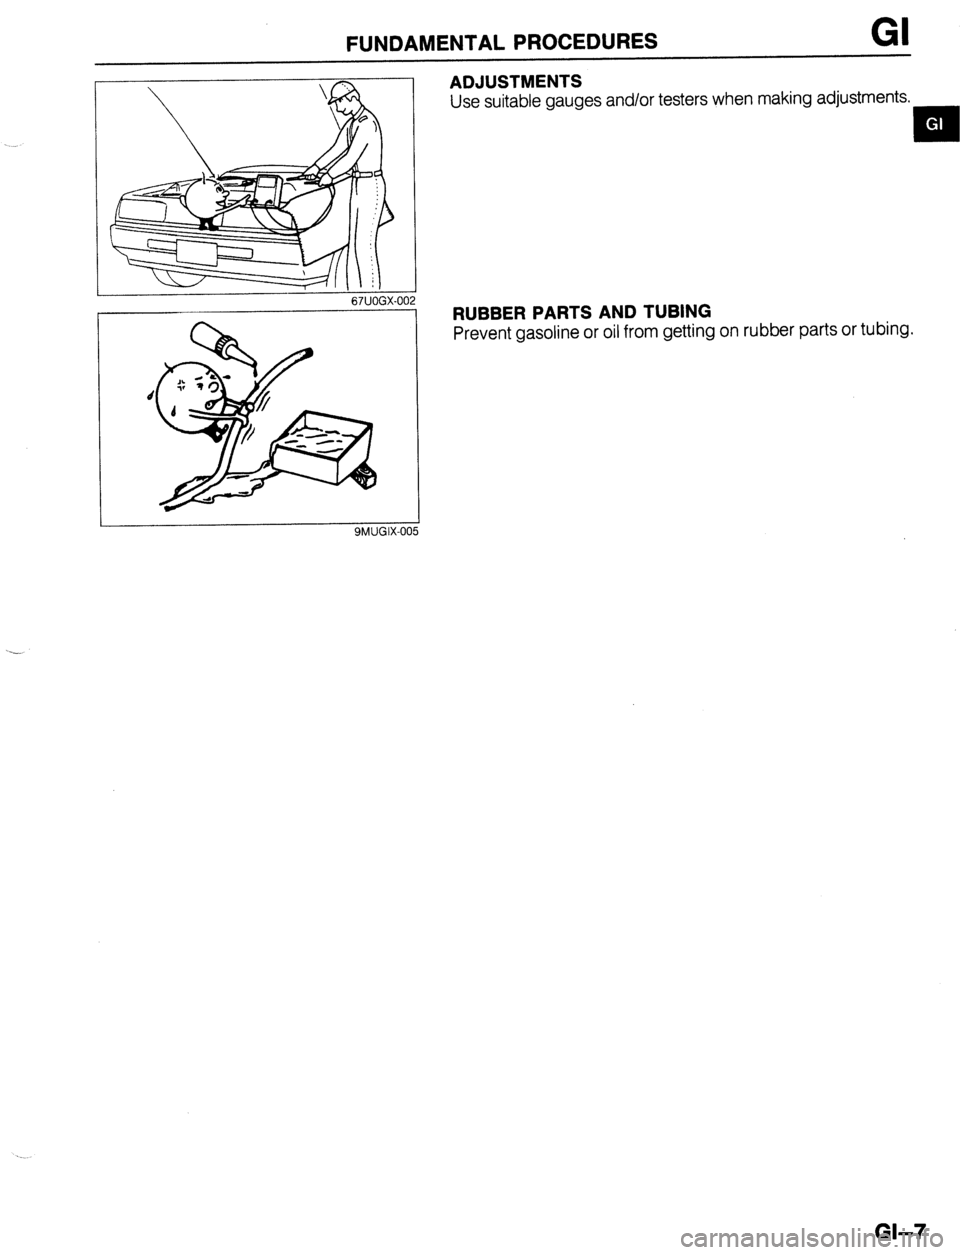 MAZDA 323 1989  Factory Repair Manual FUNDAMENTALPROCEDURES GI 
I 
67UOGX-00 
ADJUSTMENTS 
Use suitable gauges and/or testers when making adjustments. 
EN 
RUBBER PARTS AND TUBING 
Prevent gasoline or oil from getting on rubber parts or t